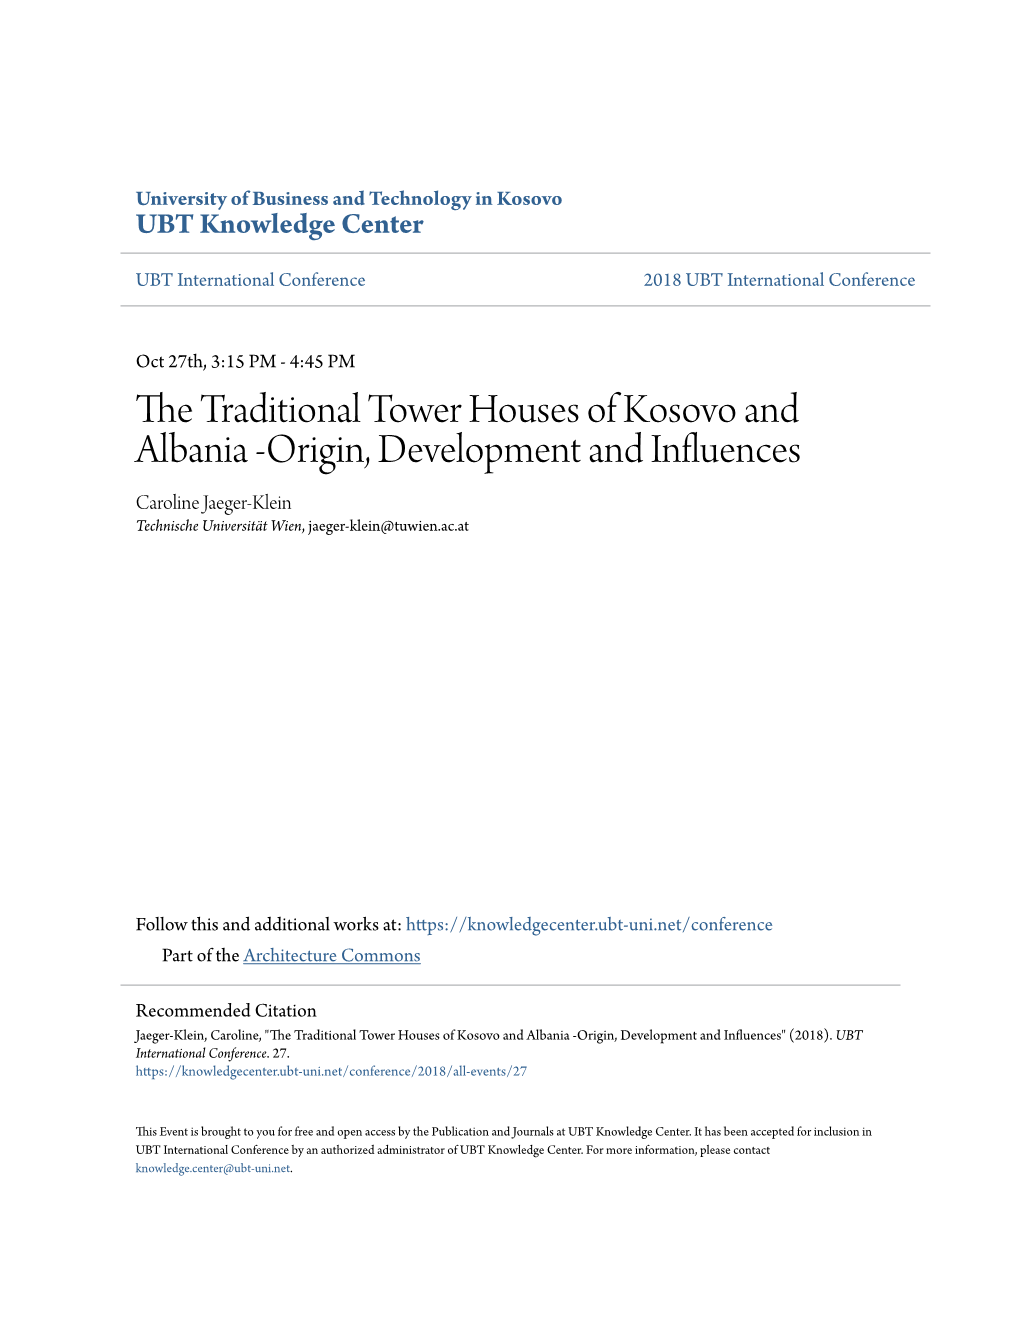 The Traditional Tower Houses of Kosovo and Albania - Origin, Development and Influences